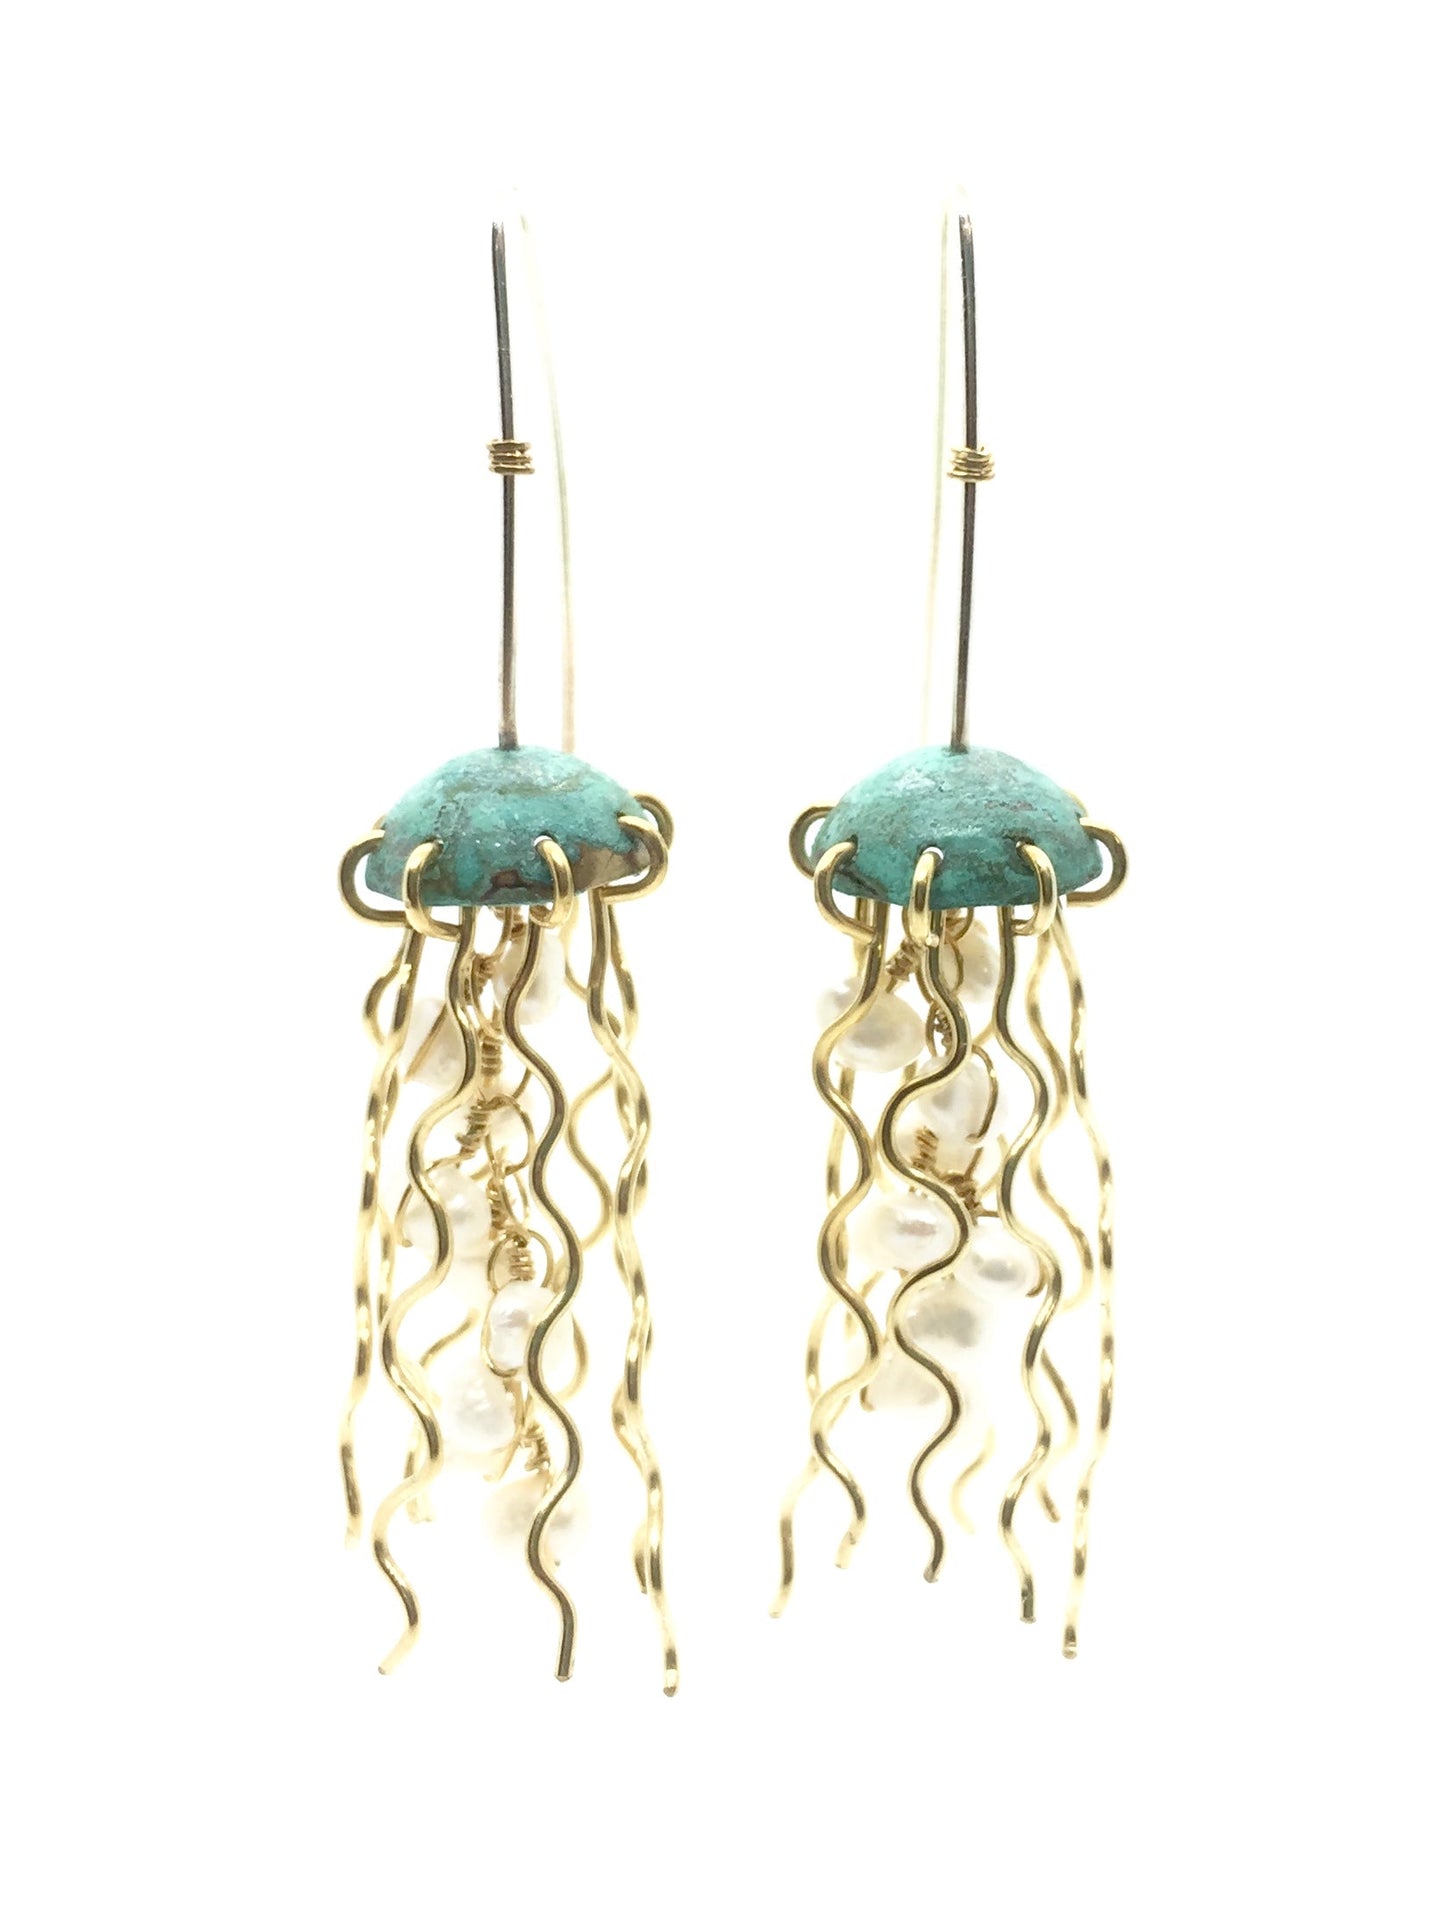 Green Copper Jellyfish Earrings with Pearls and Sterling Silver Earwires at Heal